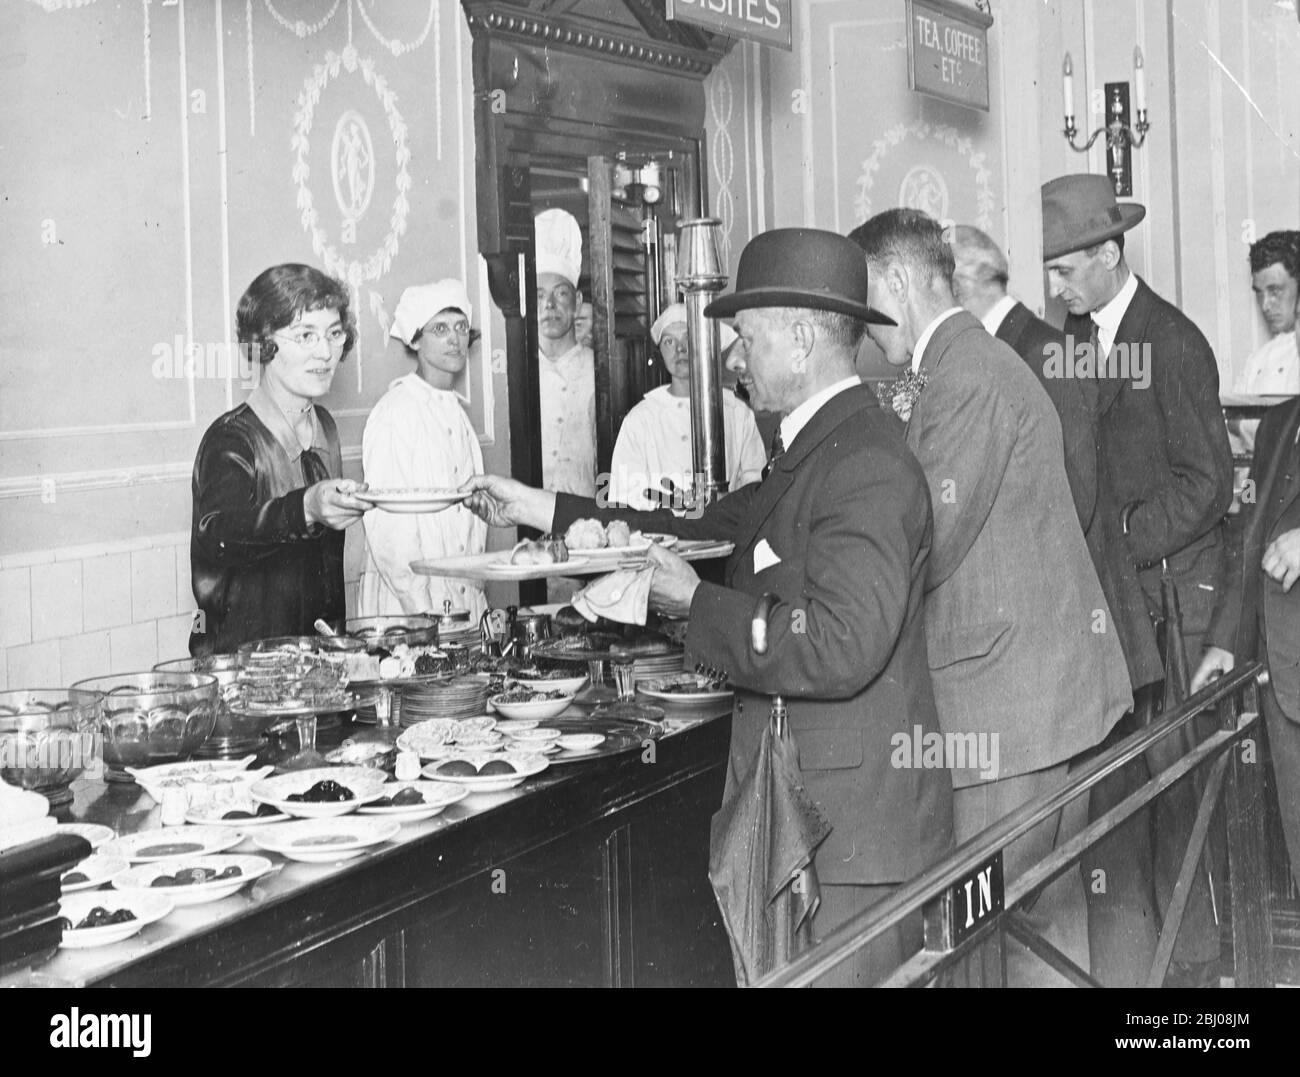 (damaged caption) - A new caferteria - or help yourself restaurant. A new concept brought in from the Untied States when the consumer can put what they would like on a plate and pay at the end of the line before seating and eating. - London, England - c.1930 Stock Photo